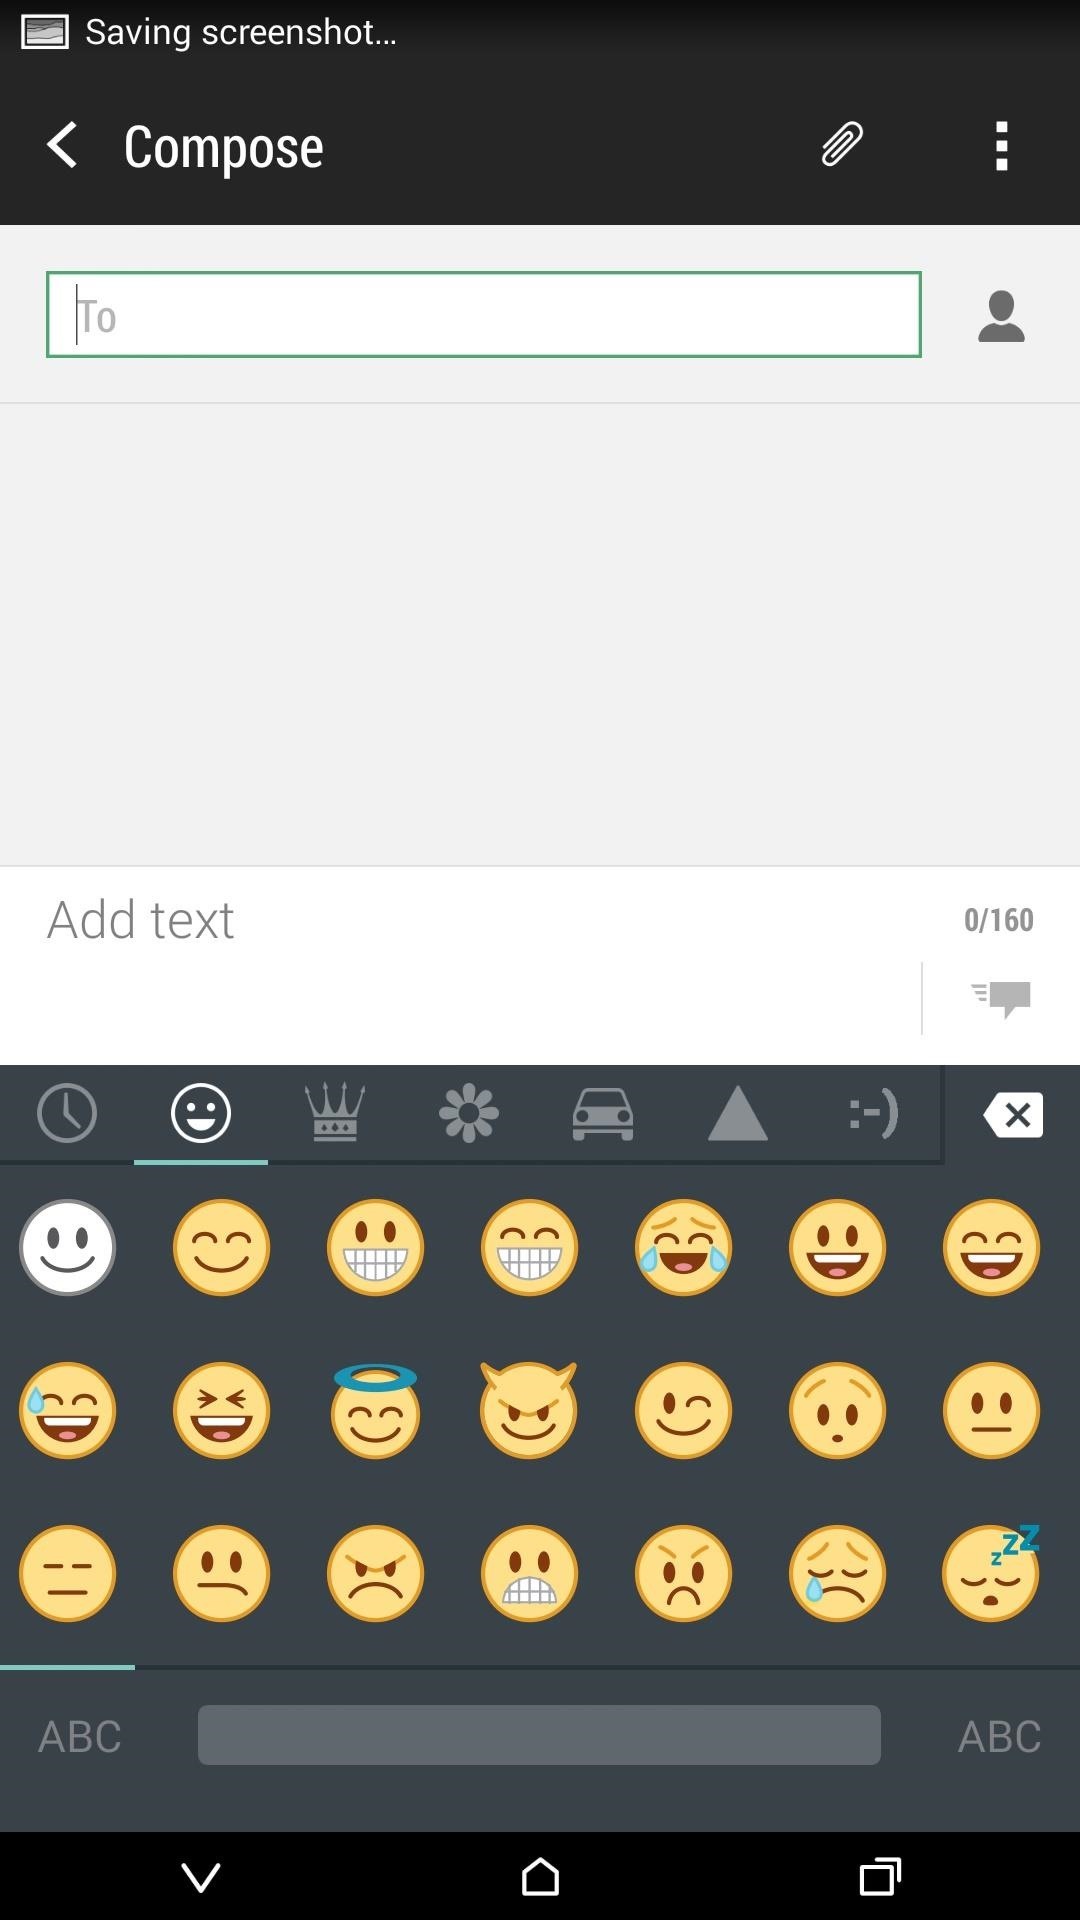 How to Get Android's New "L" Keyboard on Your HTC One or Other Android Device